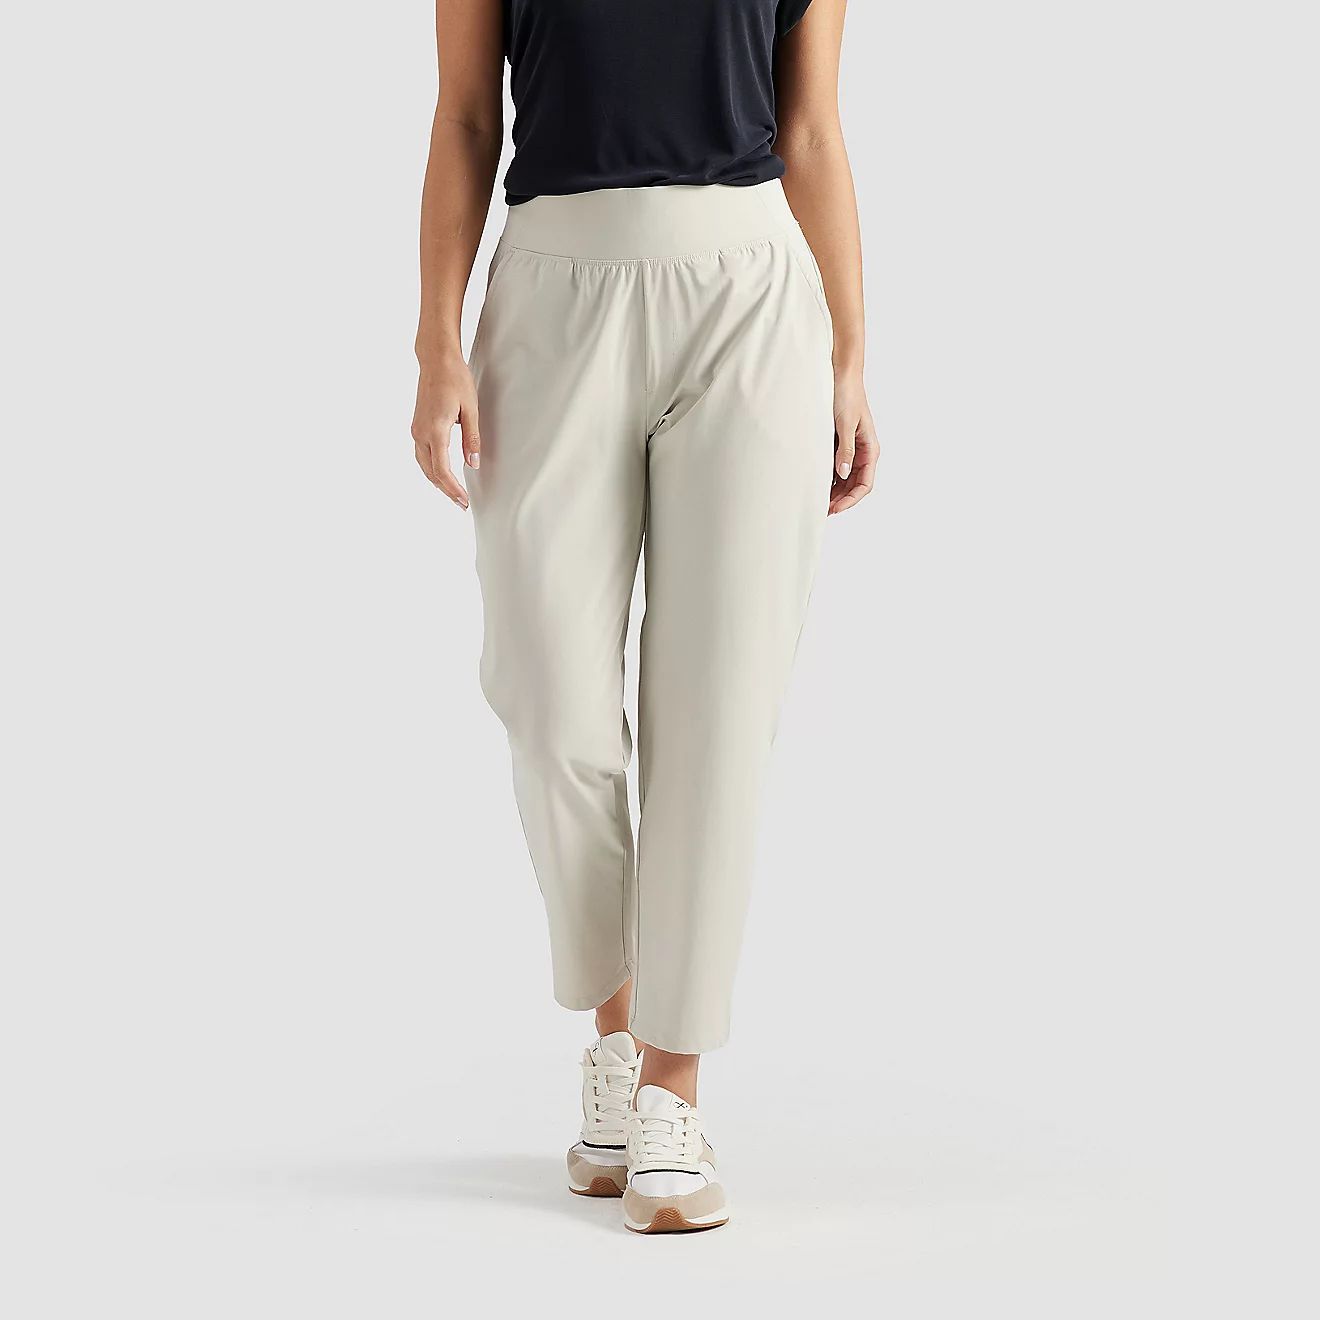 Freely Women's Metro Pants | Free Shipping at Academy | Academy Sports + Outdoors